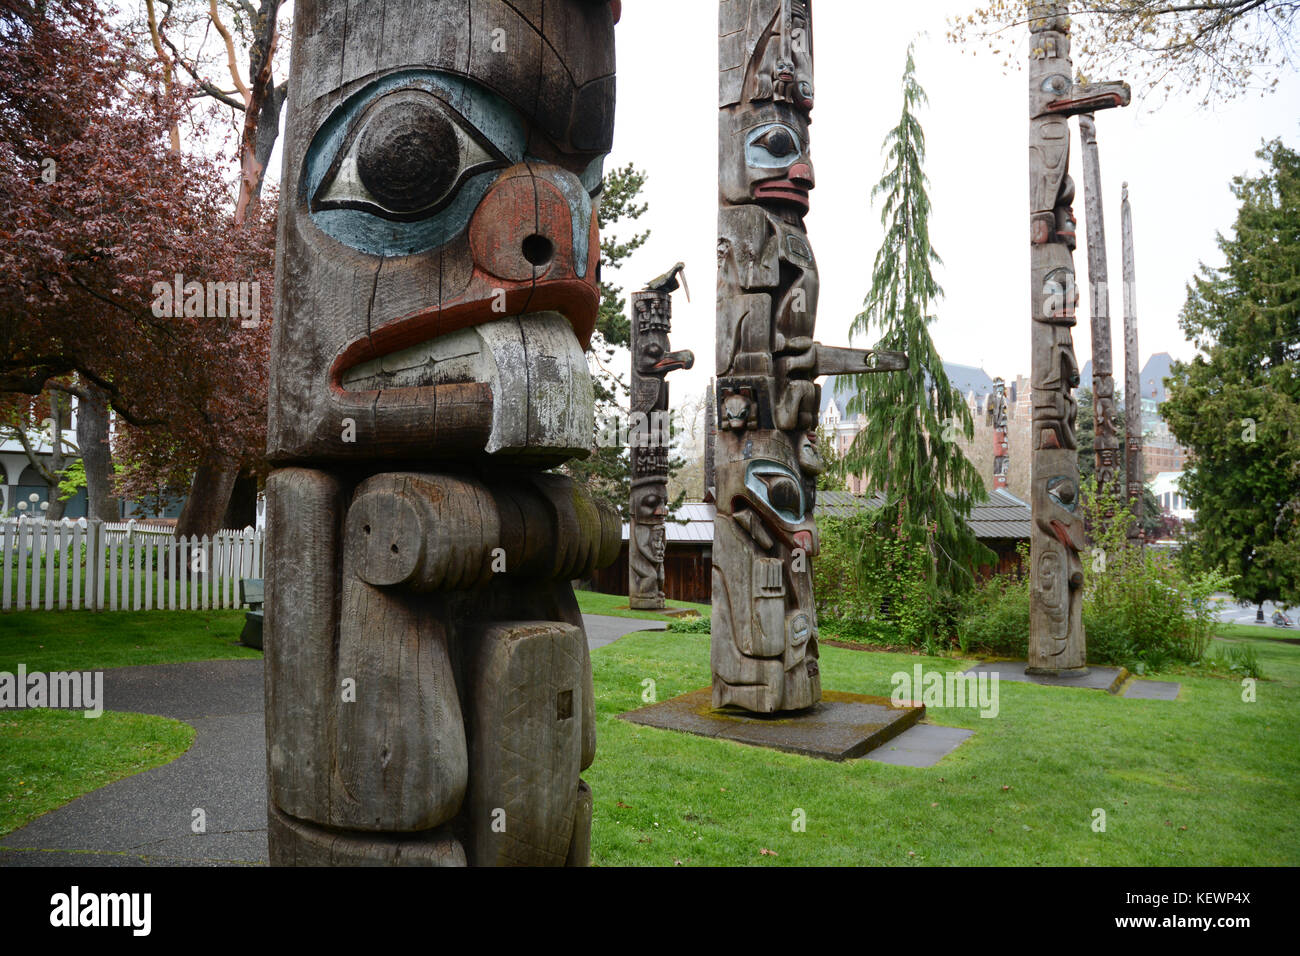 Traditional Northwest indigenous totem poles on display on the grounds of the Royal BC Museum, Victoria, British Columbia, Canada. Stock Photo